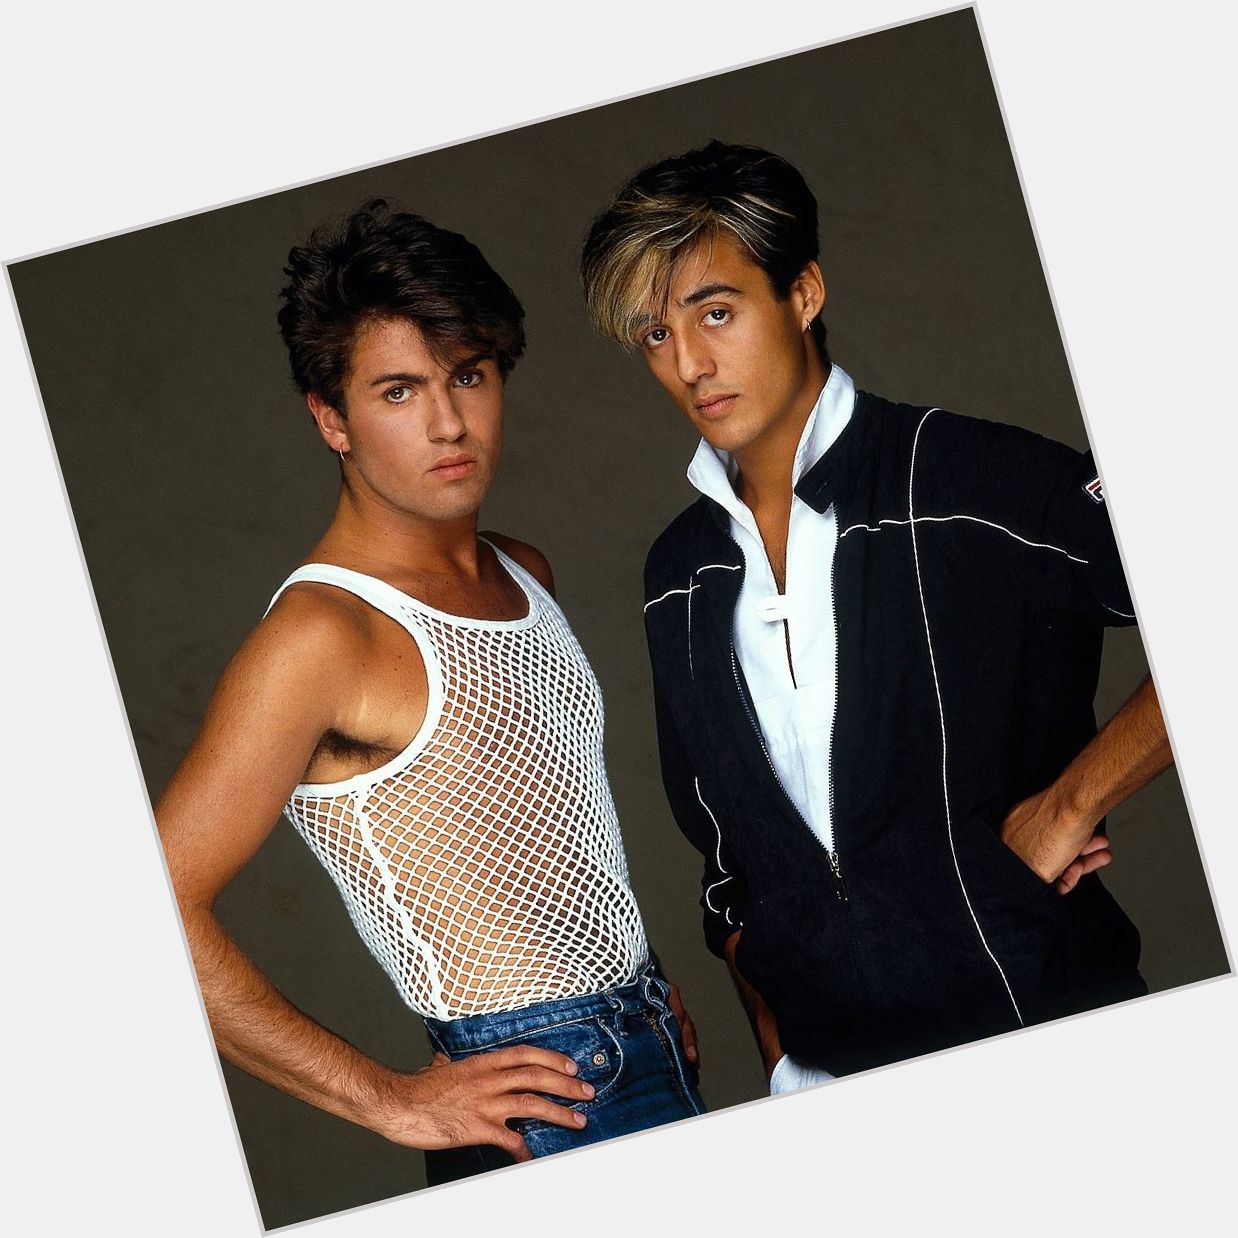 A very happy 60th birthday to Andrew Ridgeley. Wham! by Brian Aris, 1983. 